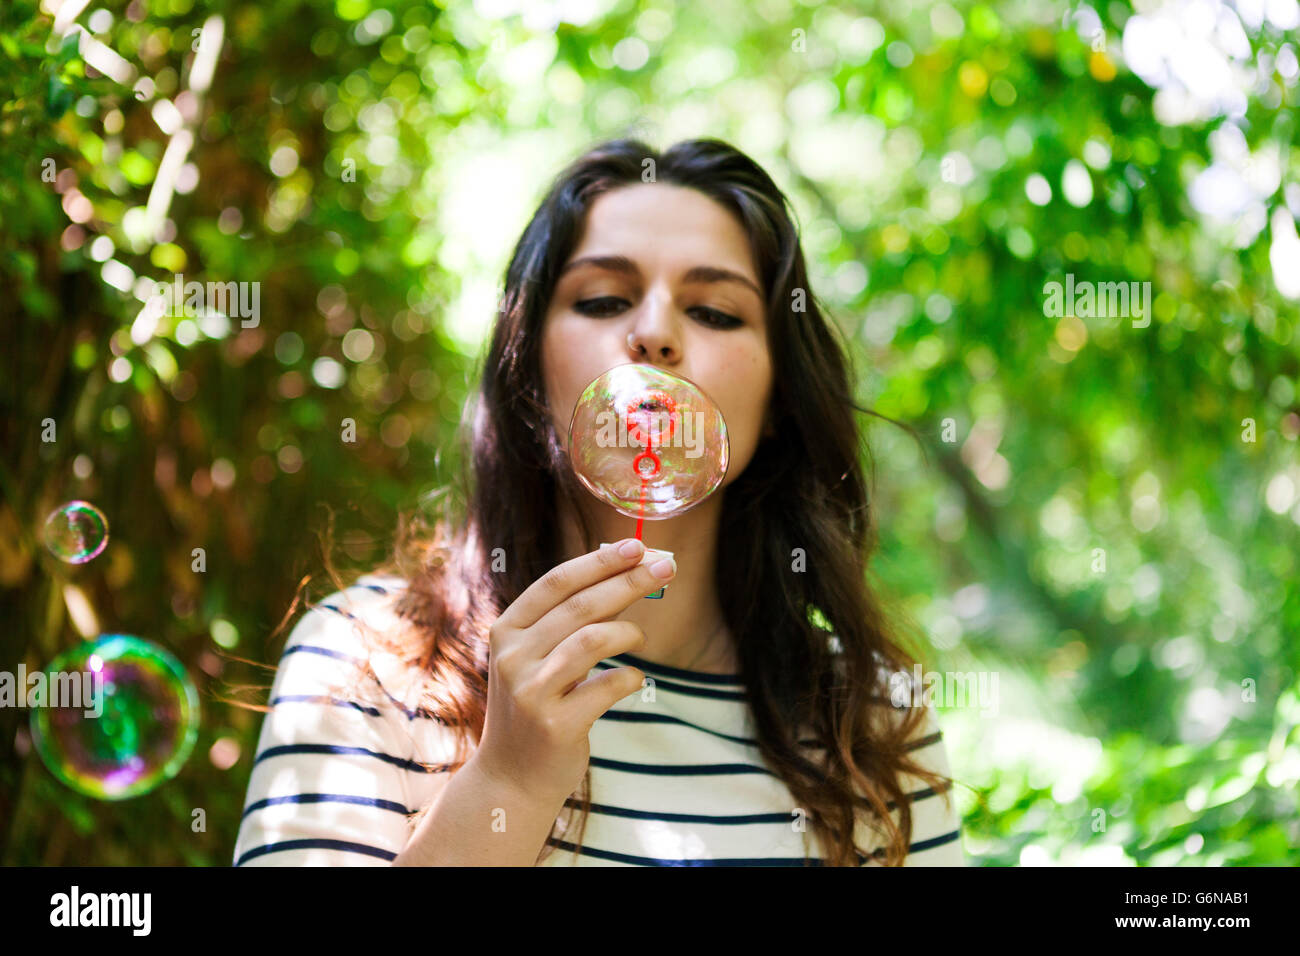 Young woman blowing soap bubbles Stock Photo - Alamy